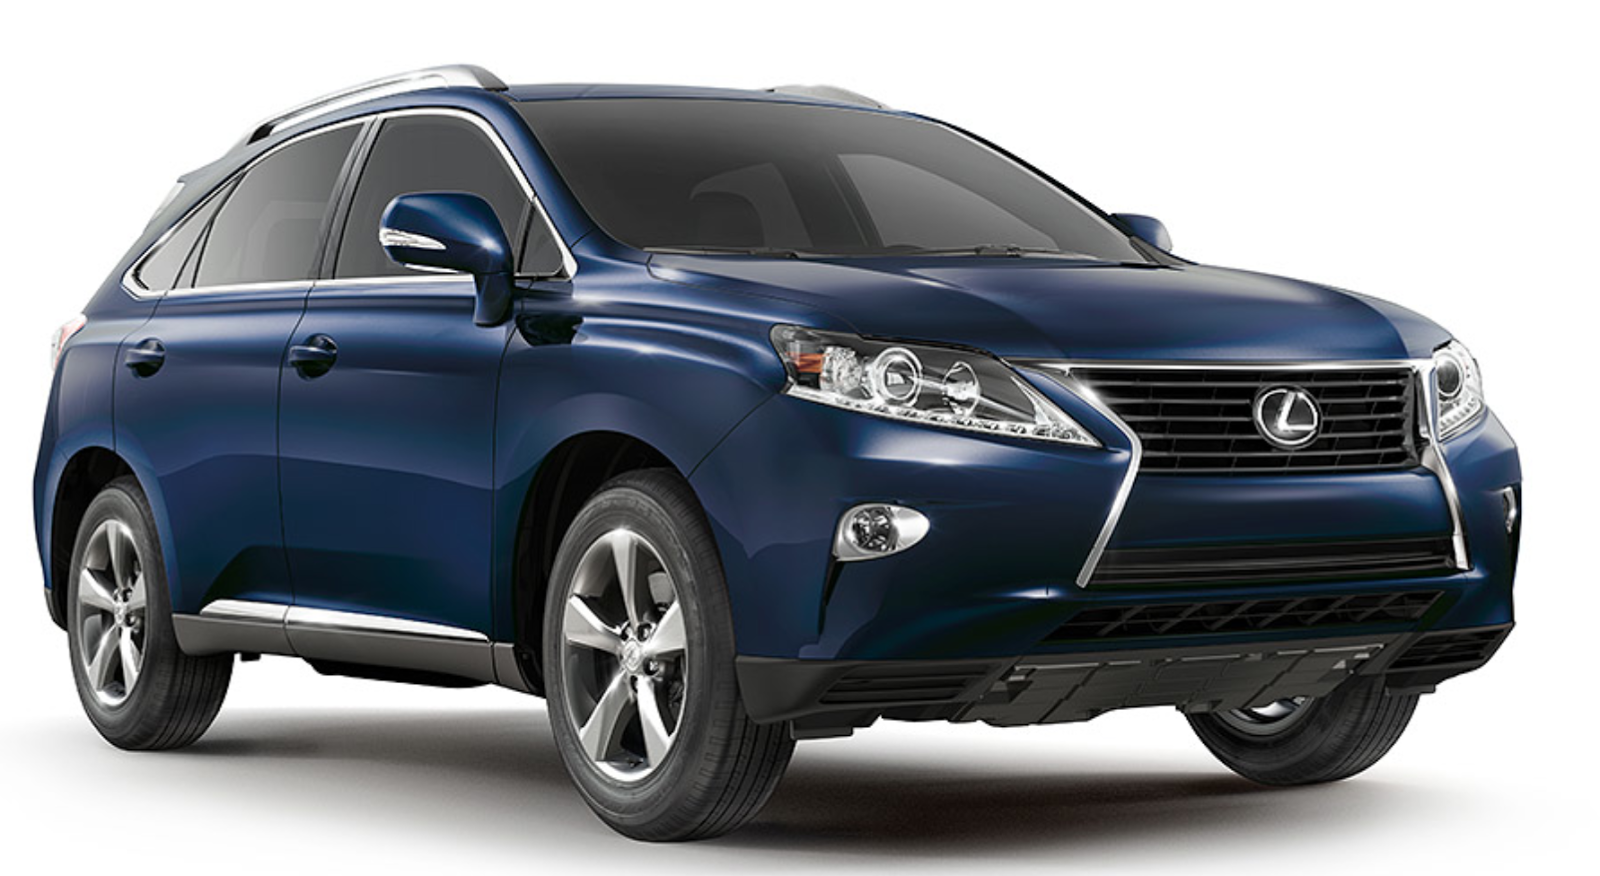 Lexus SUV the RX 350 in blue